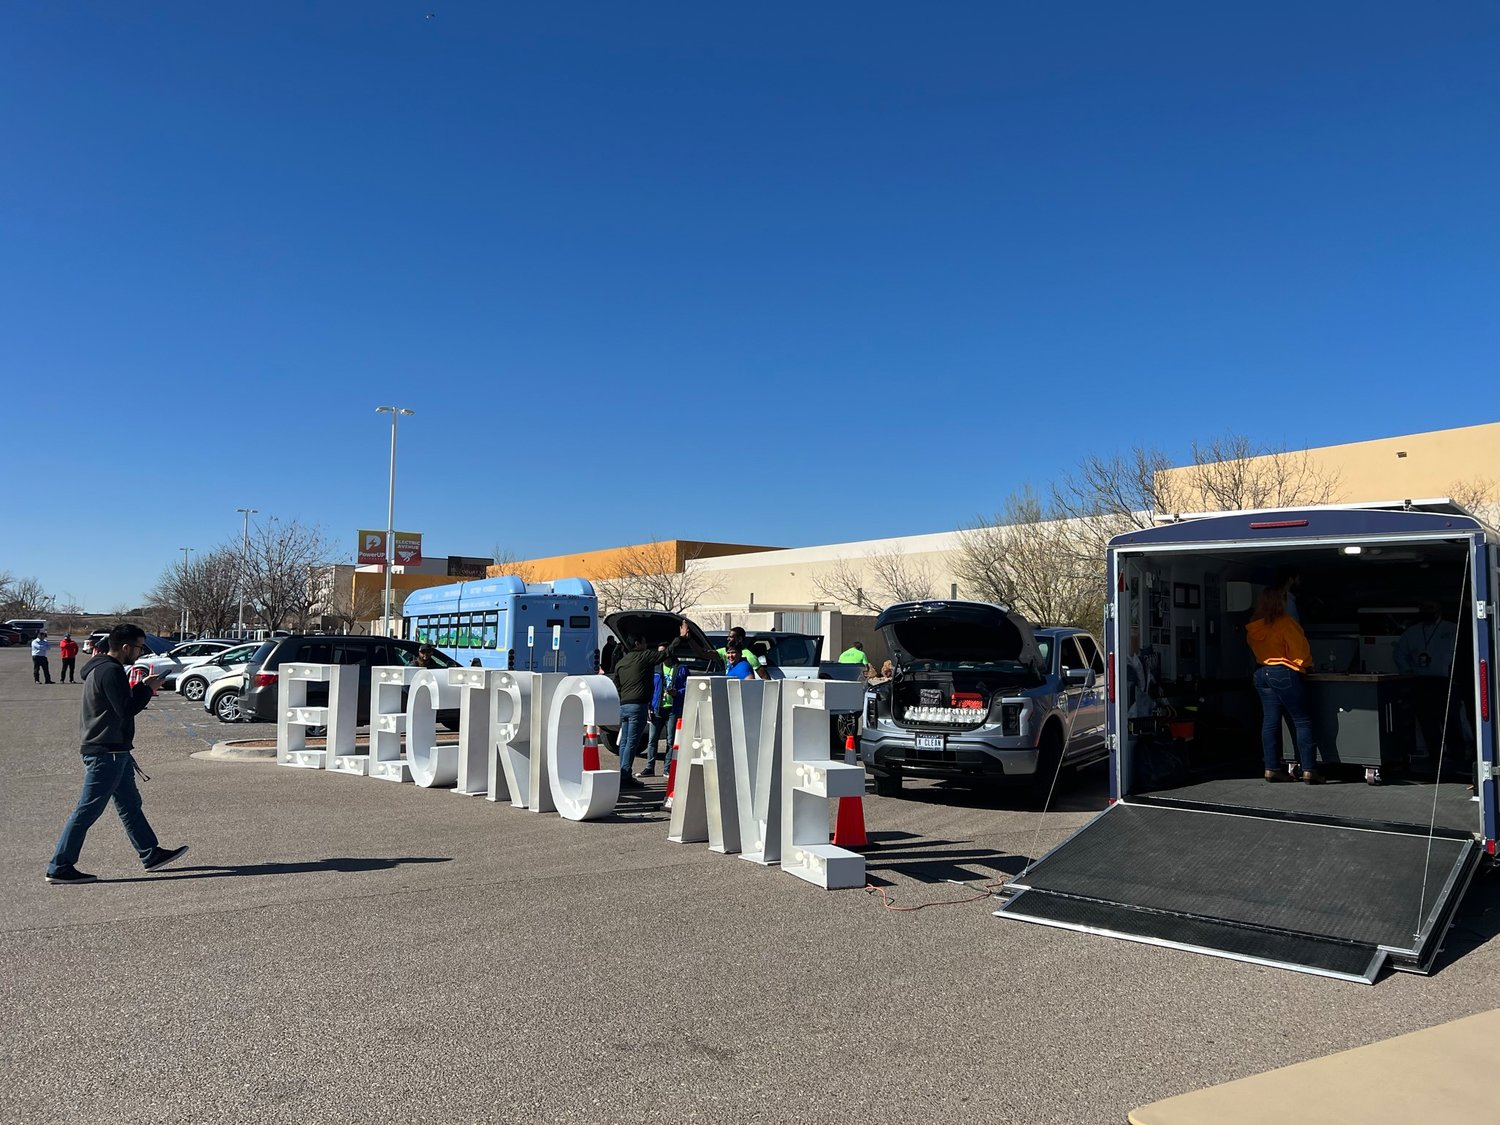 The Las Cruces PowerUP expo welcomes visitors to enter along Electric Avenue where all kinds of electric and energy efficient vehicles are on display from bicycles to a Ford F-150 Lightning.